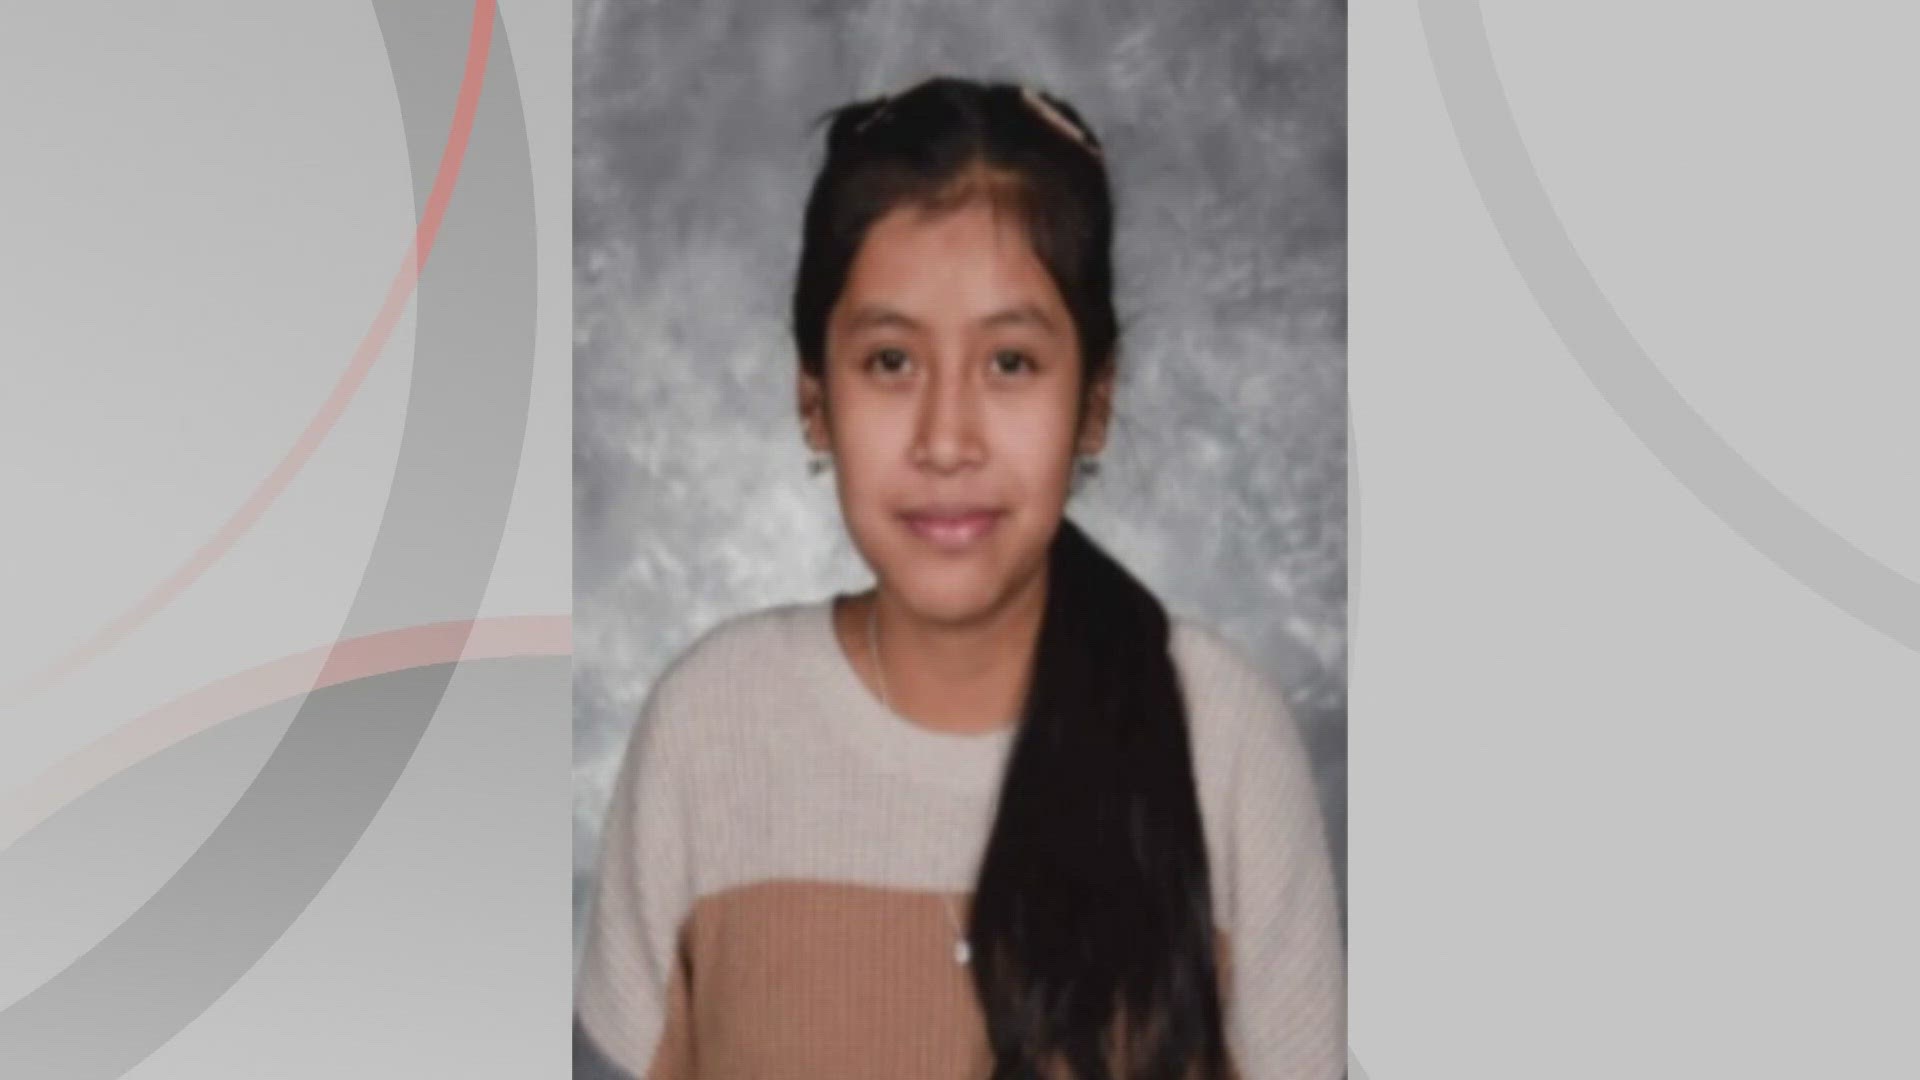 The Summit County Sheriff's Office is asking for help finding a missing 15-year-old girl -- identified as Maria Maaz-Ba -- who was last seen leaving school.